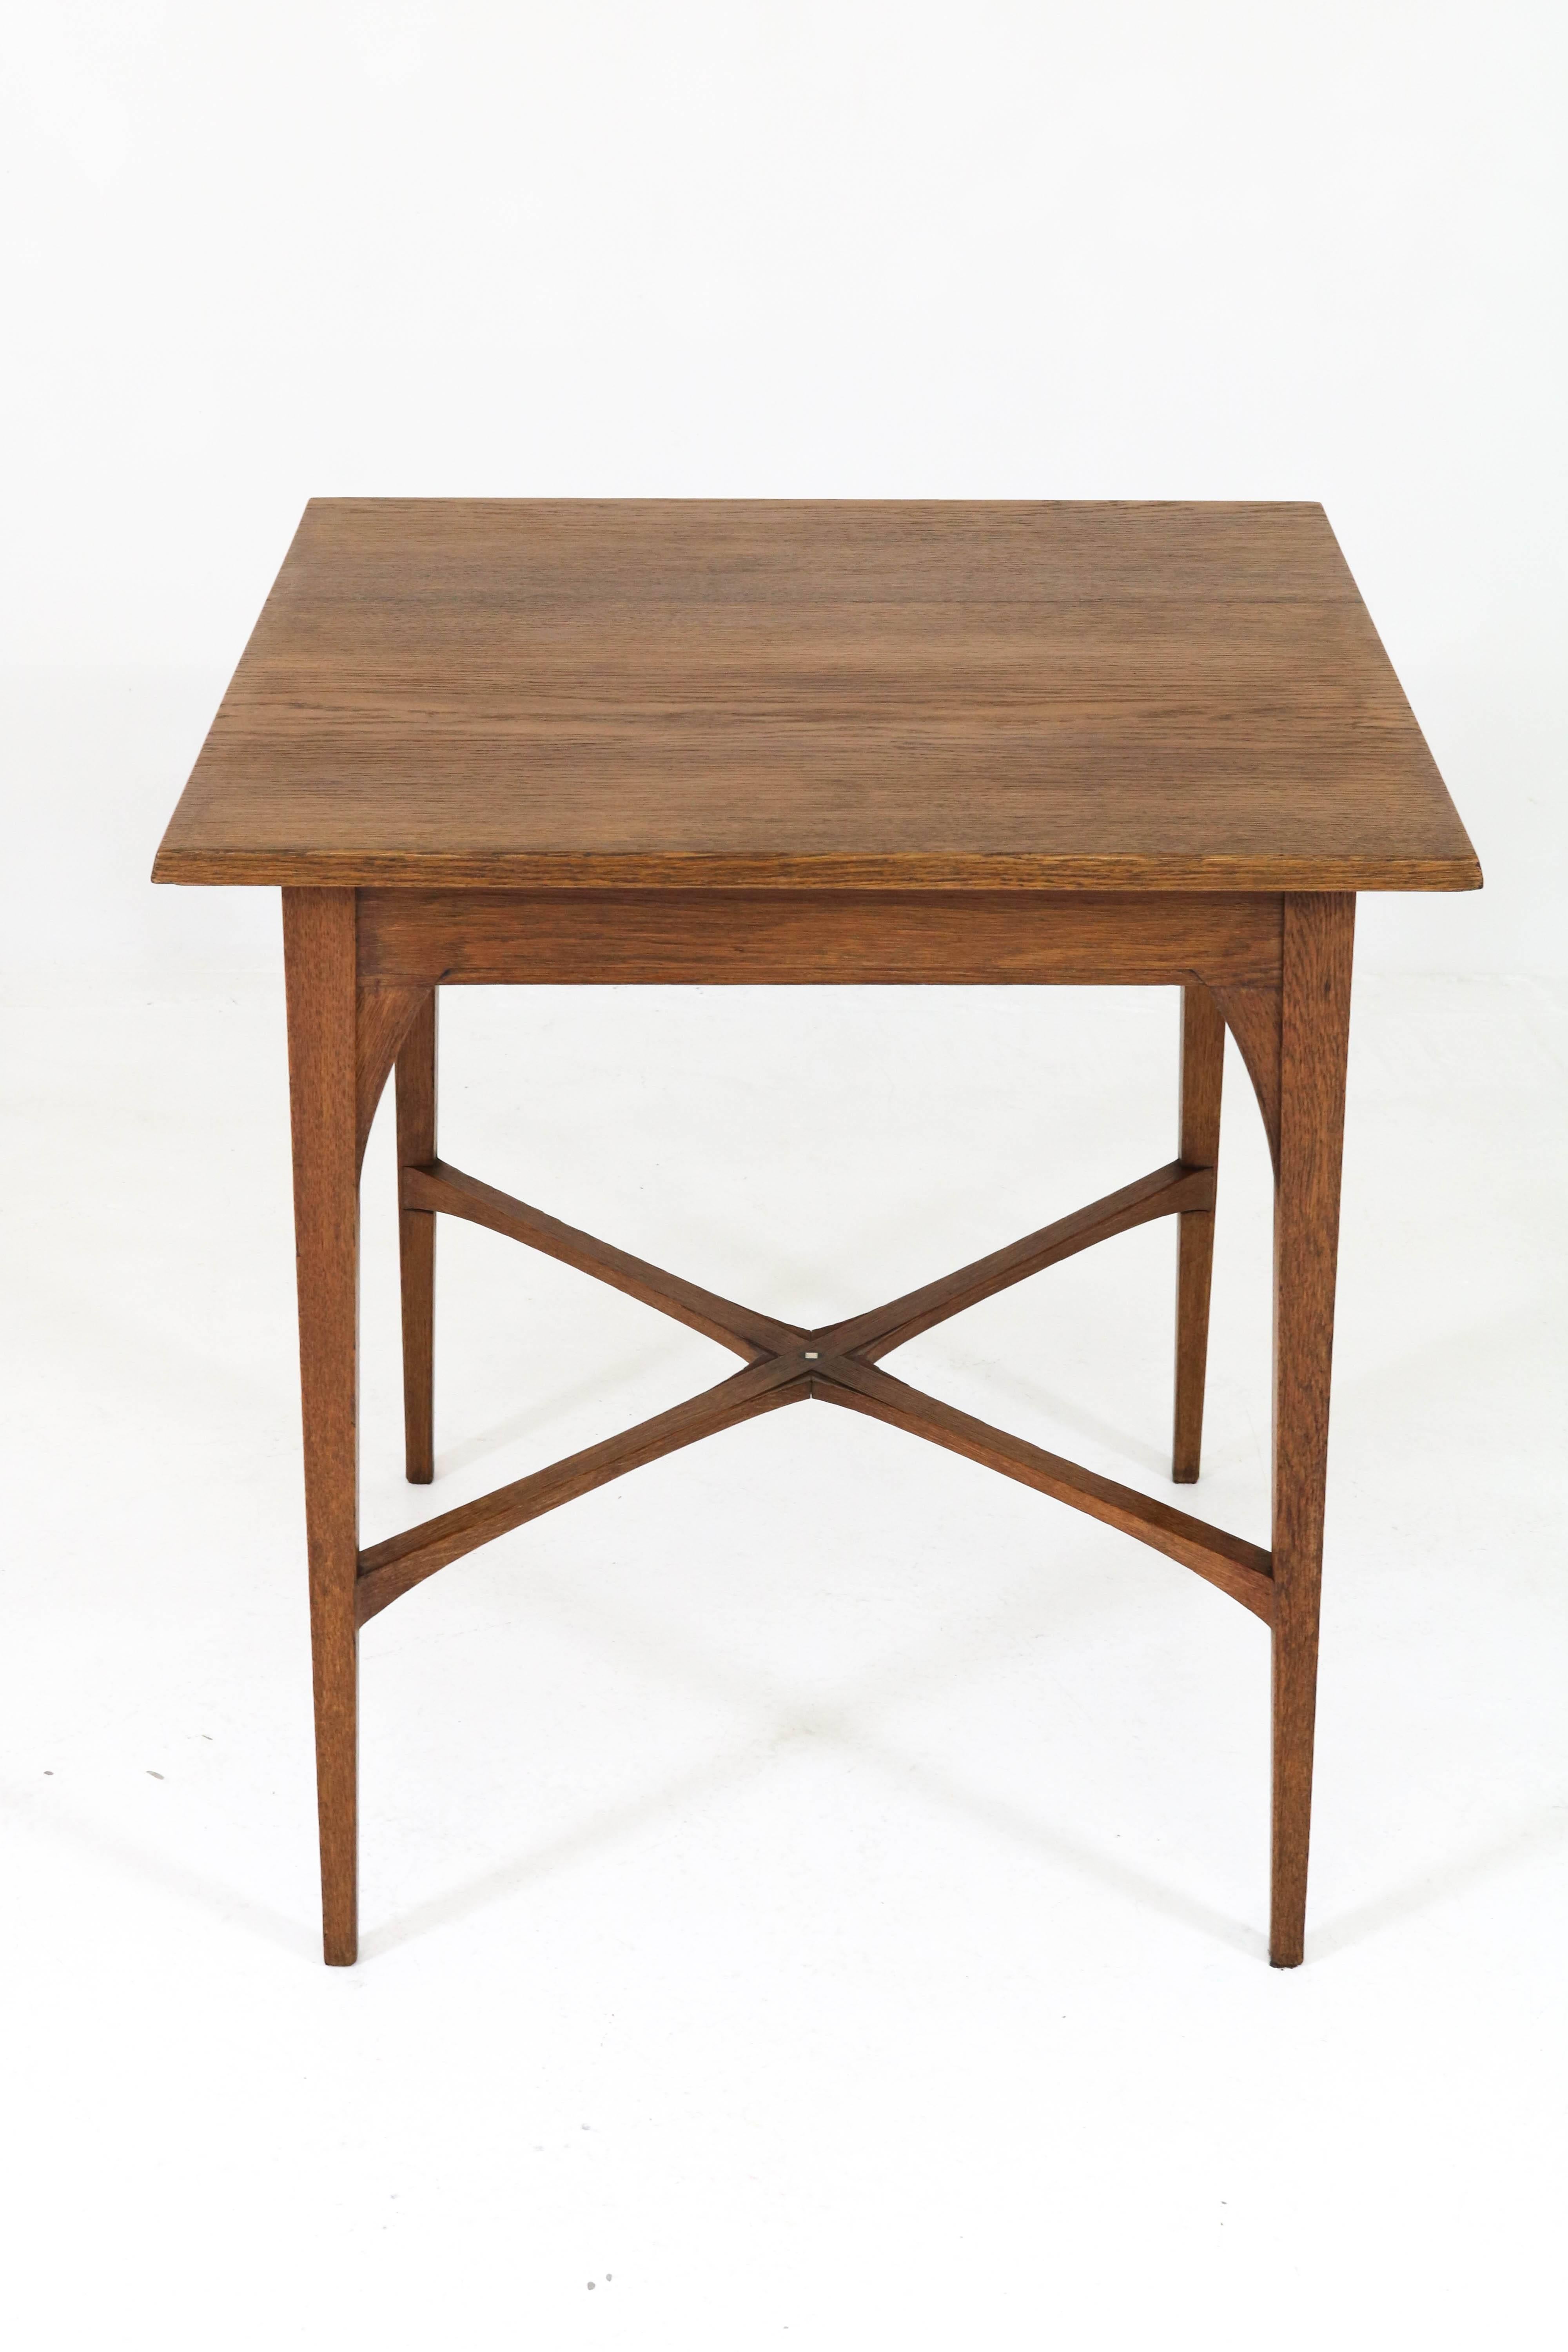 Elegant Dutch Arts & Crafts occasional table by J.A. Huizinga, 1900s.
Solid oak with inlay on the cross between the legs.
Marked with metal tag.
In good original condition with minor wear consistent with age and use,
preserving a beautiful